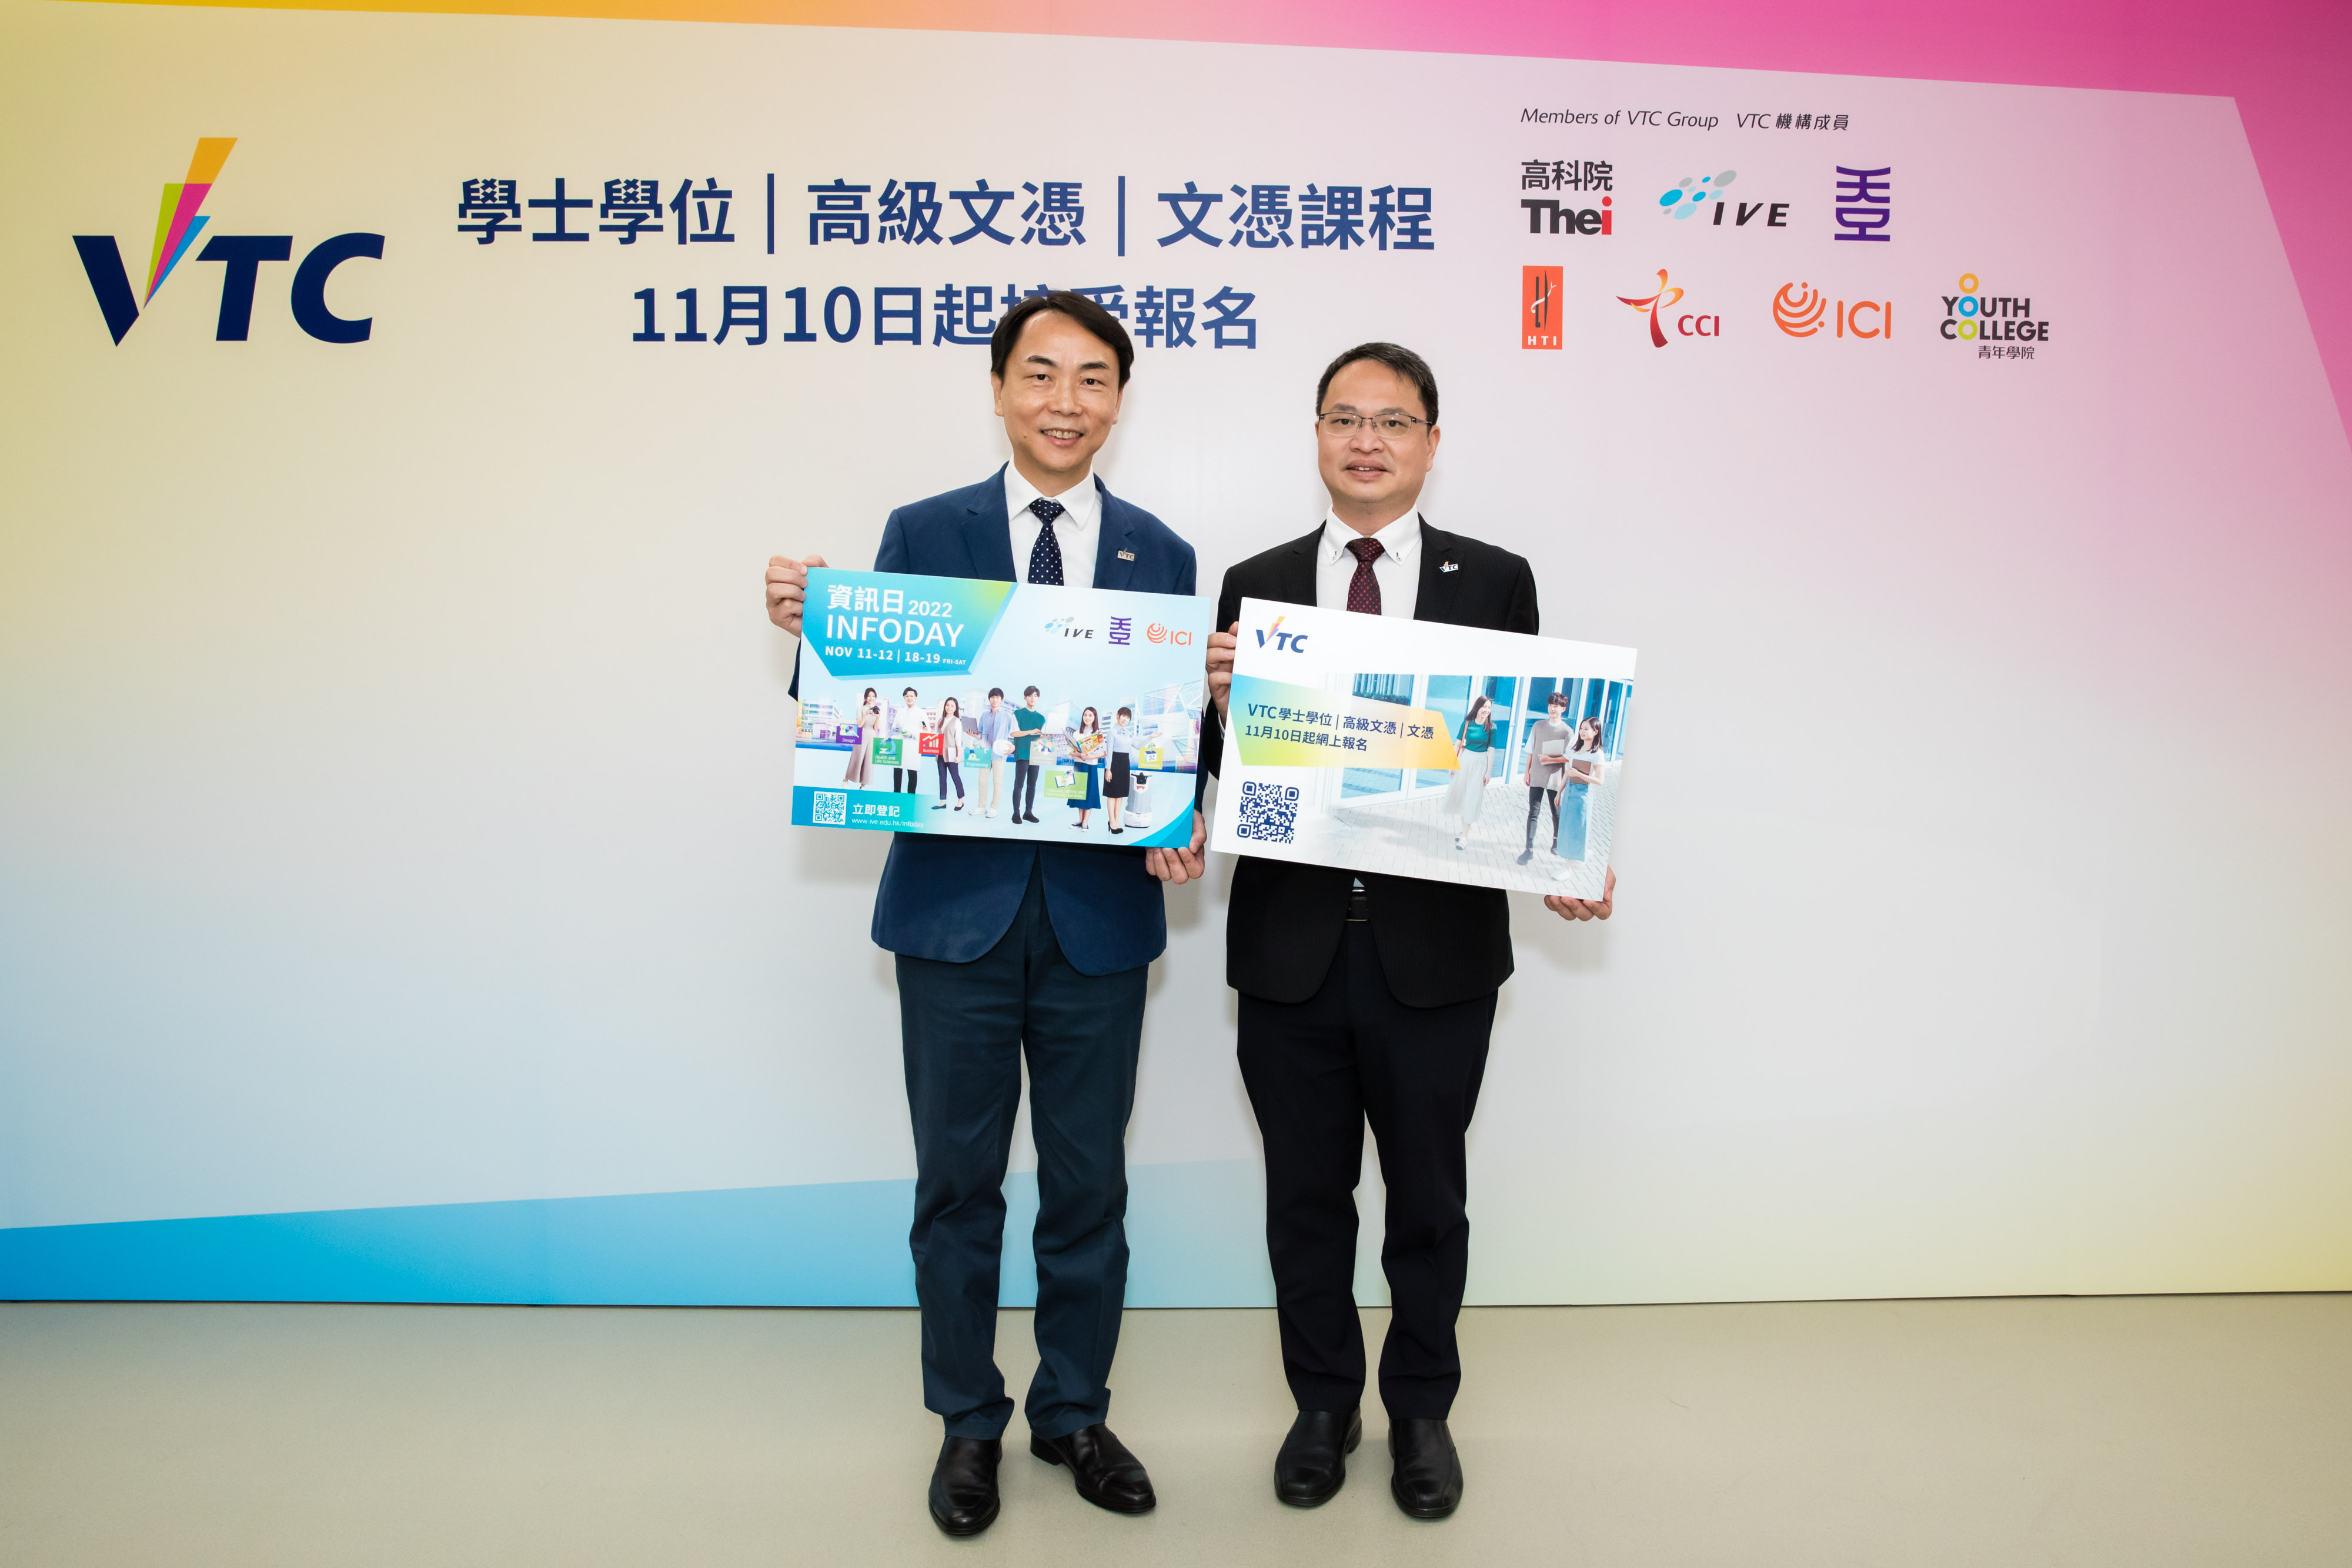 VTC Senior Assistant Executive Director, Raymond KWOK (left) and IVE Academic Director of Information Technology Discipline, John HUI (right), introduce VTC’s diverse programme offerings and learning opportunities tailored for Secondary 6 students in Academic Year 2023/24